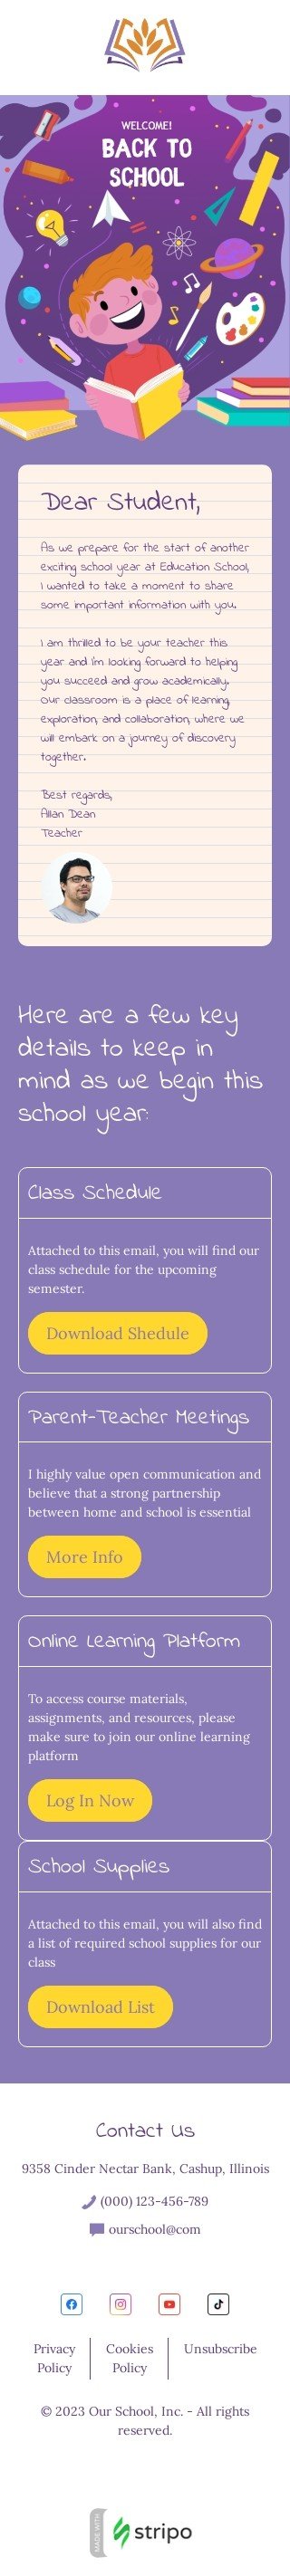 Back to school email template "Important information inside" for education industry mobile view